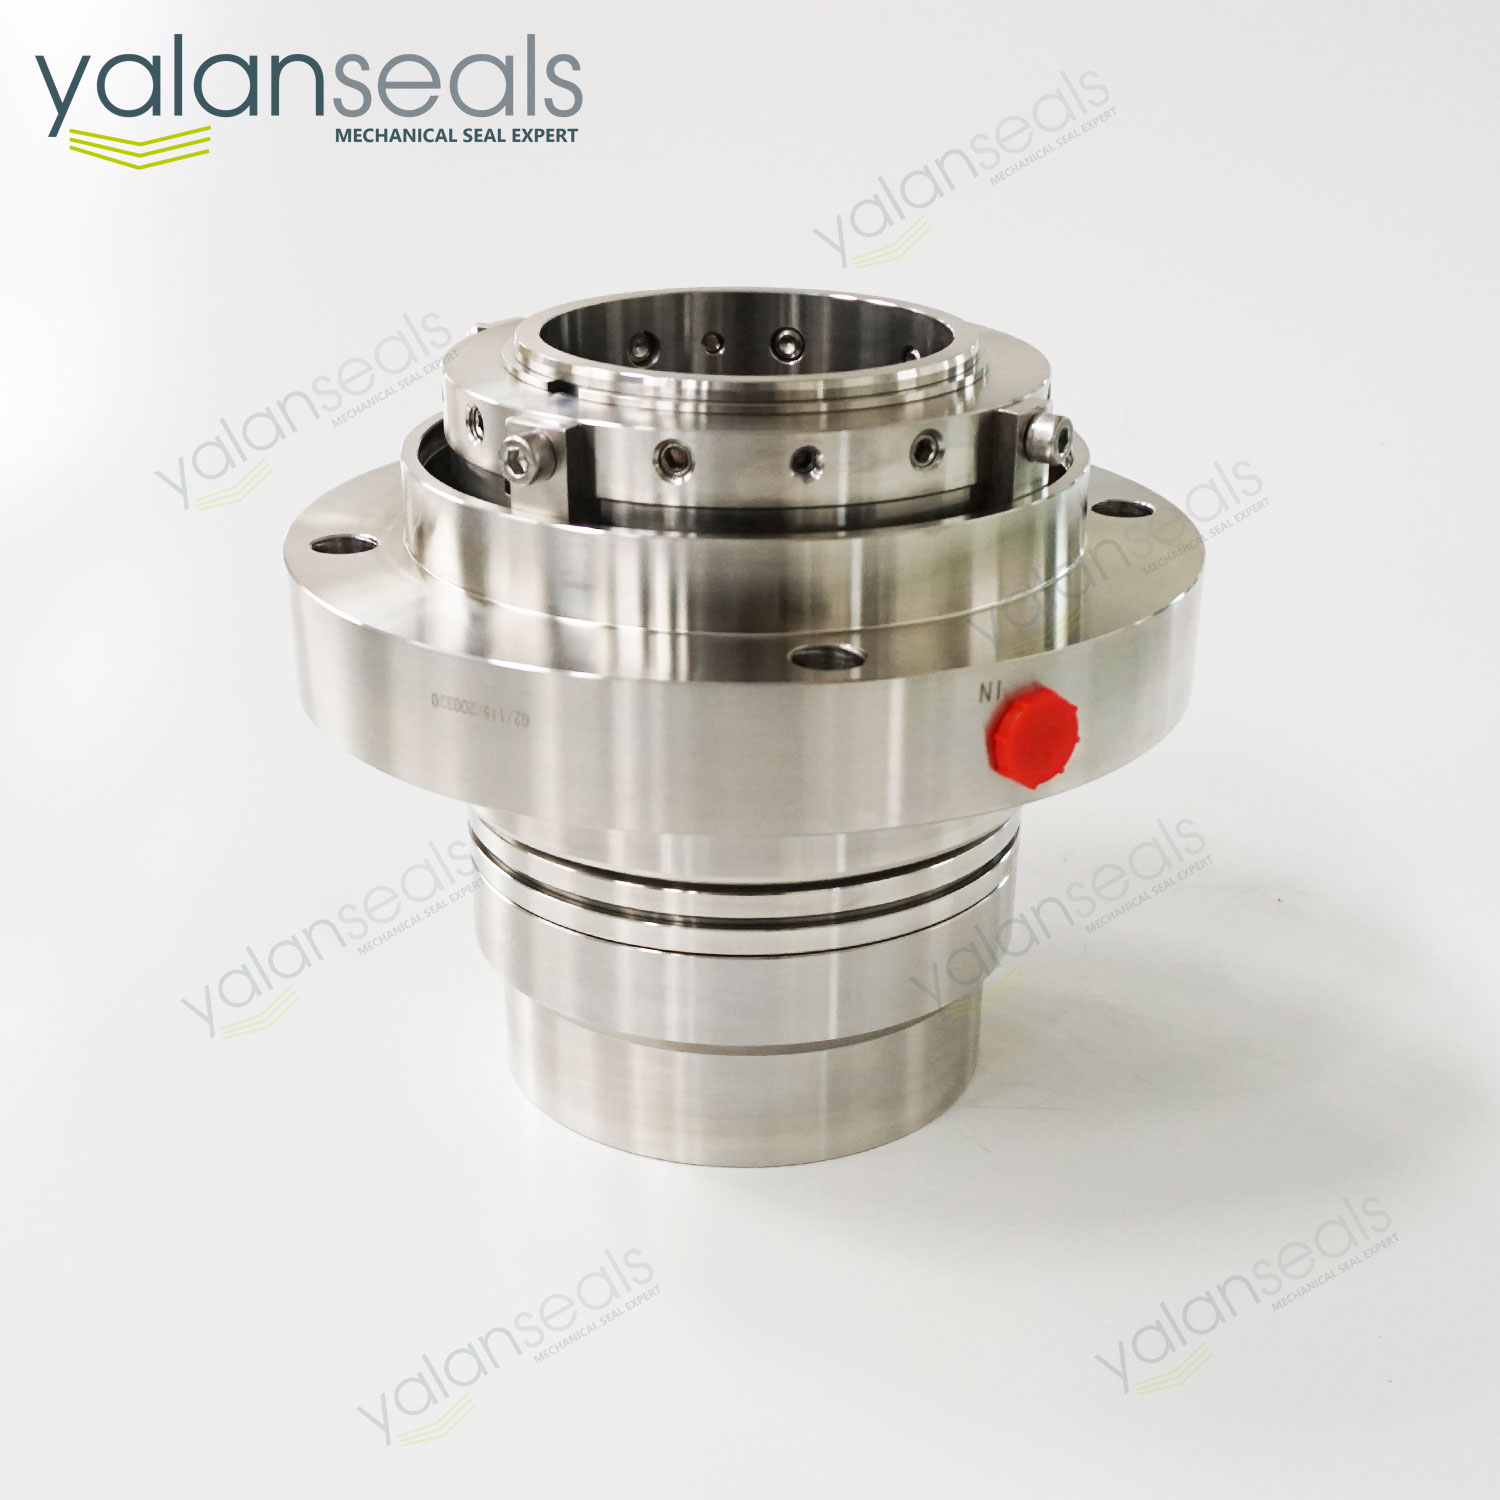 YALAN 120-Cartex-115 Double Cartridge Seal for Chemical Pumps